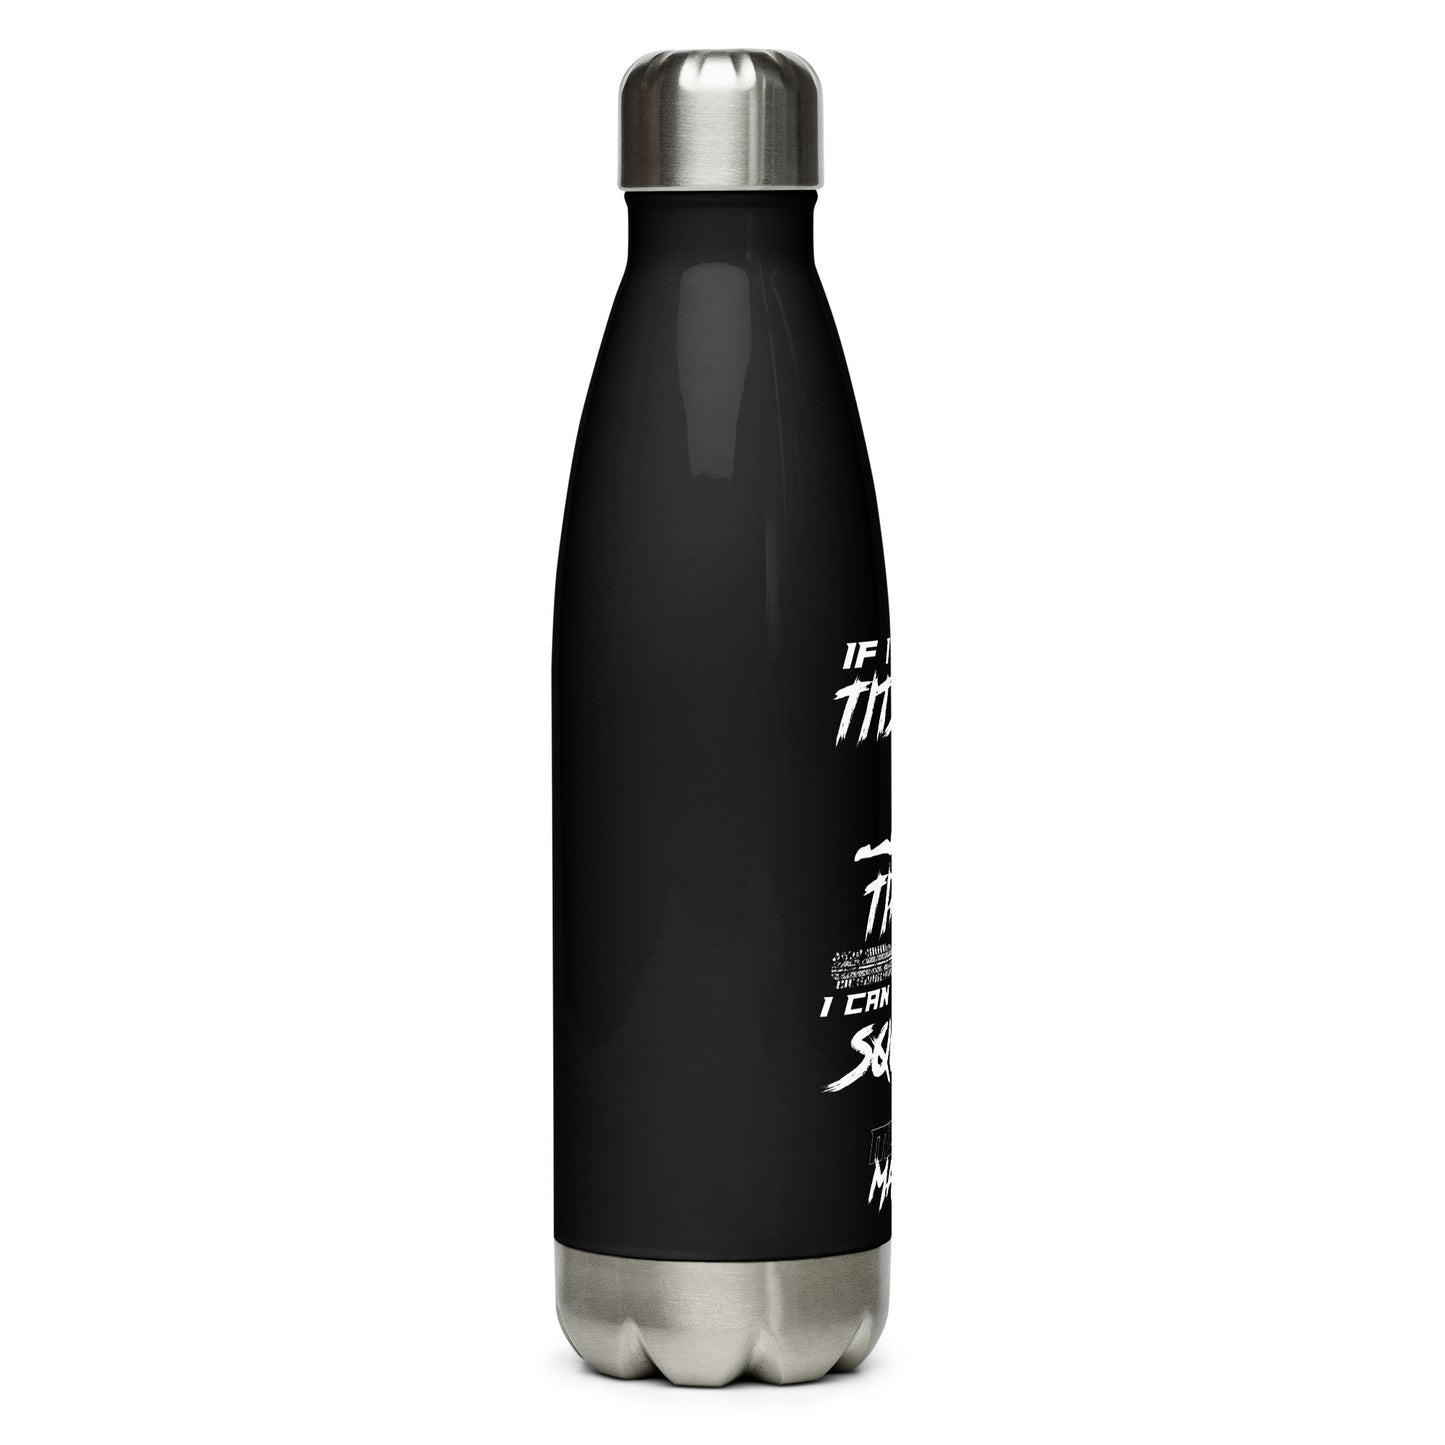 Tits Or Tires Stainless Steel Water Bottle